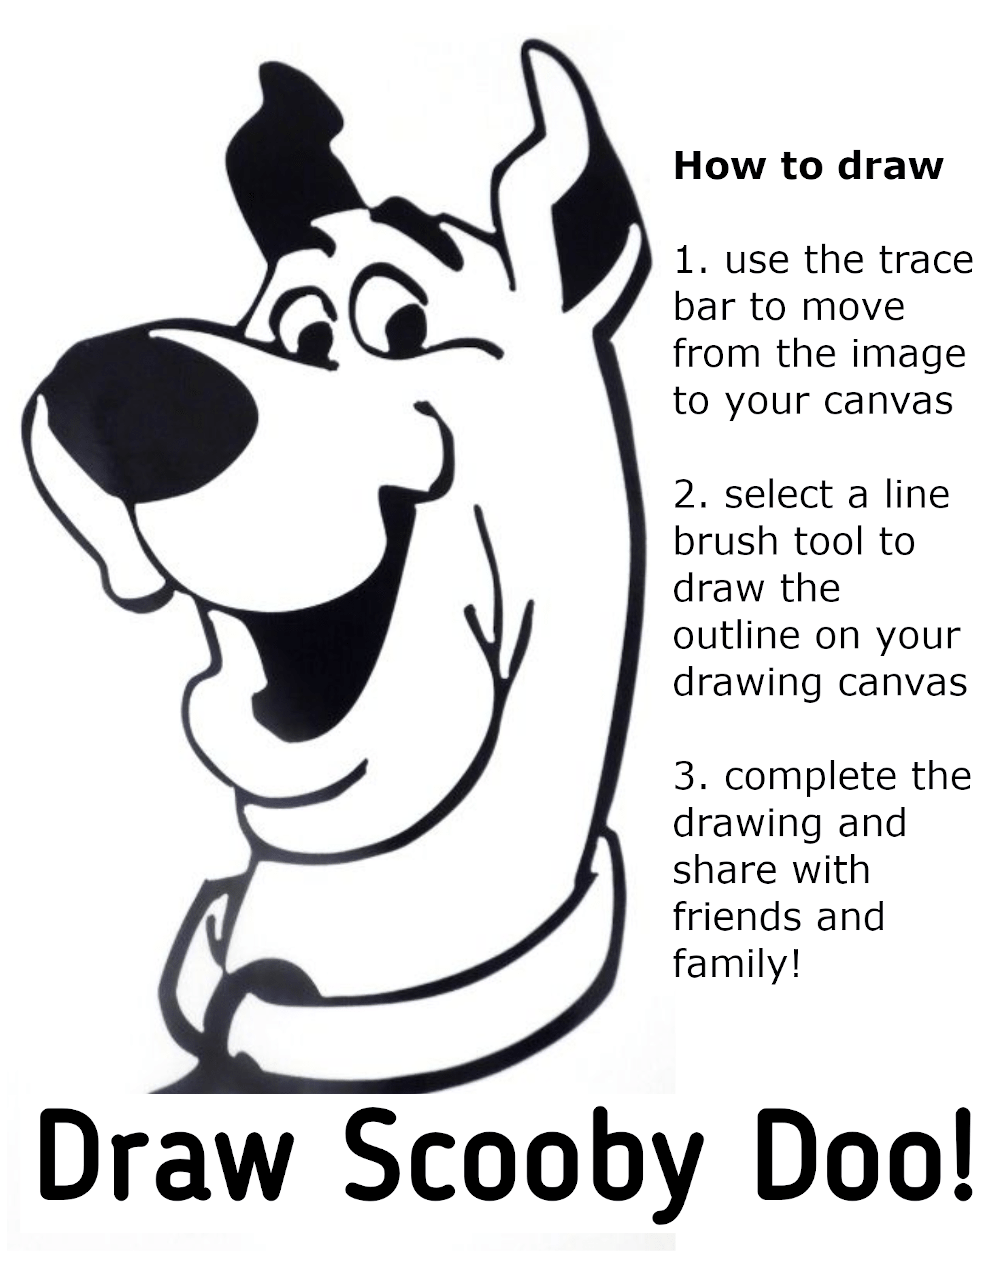 Draw Scooby cartoon character | Trace method using Paintology | Easy and  fun drawing - Paintology | Drawing App | Paint by Numbers